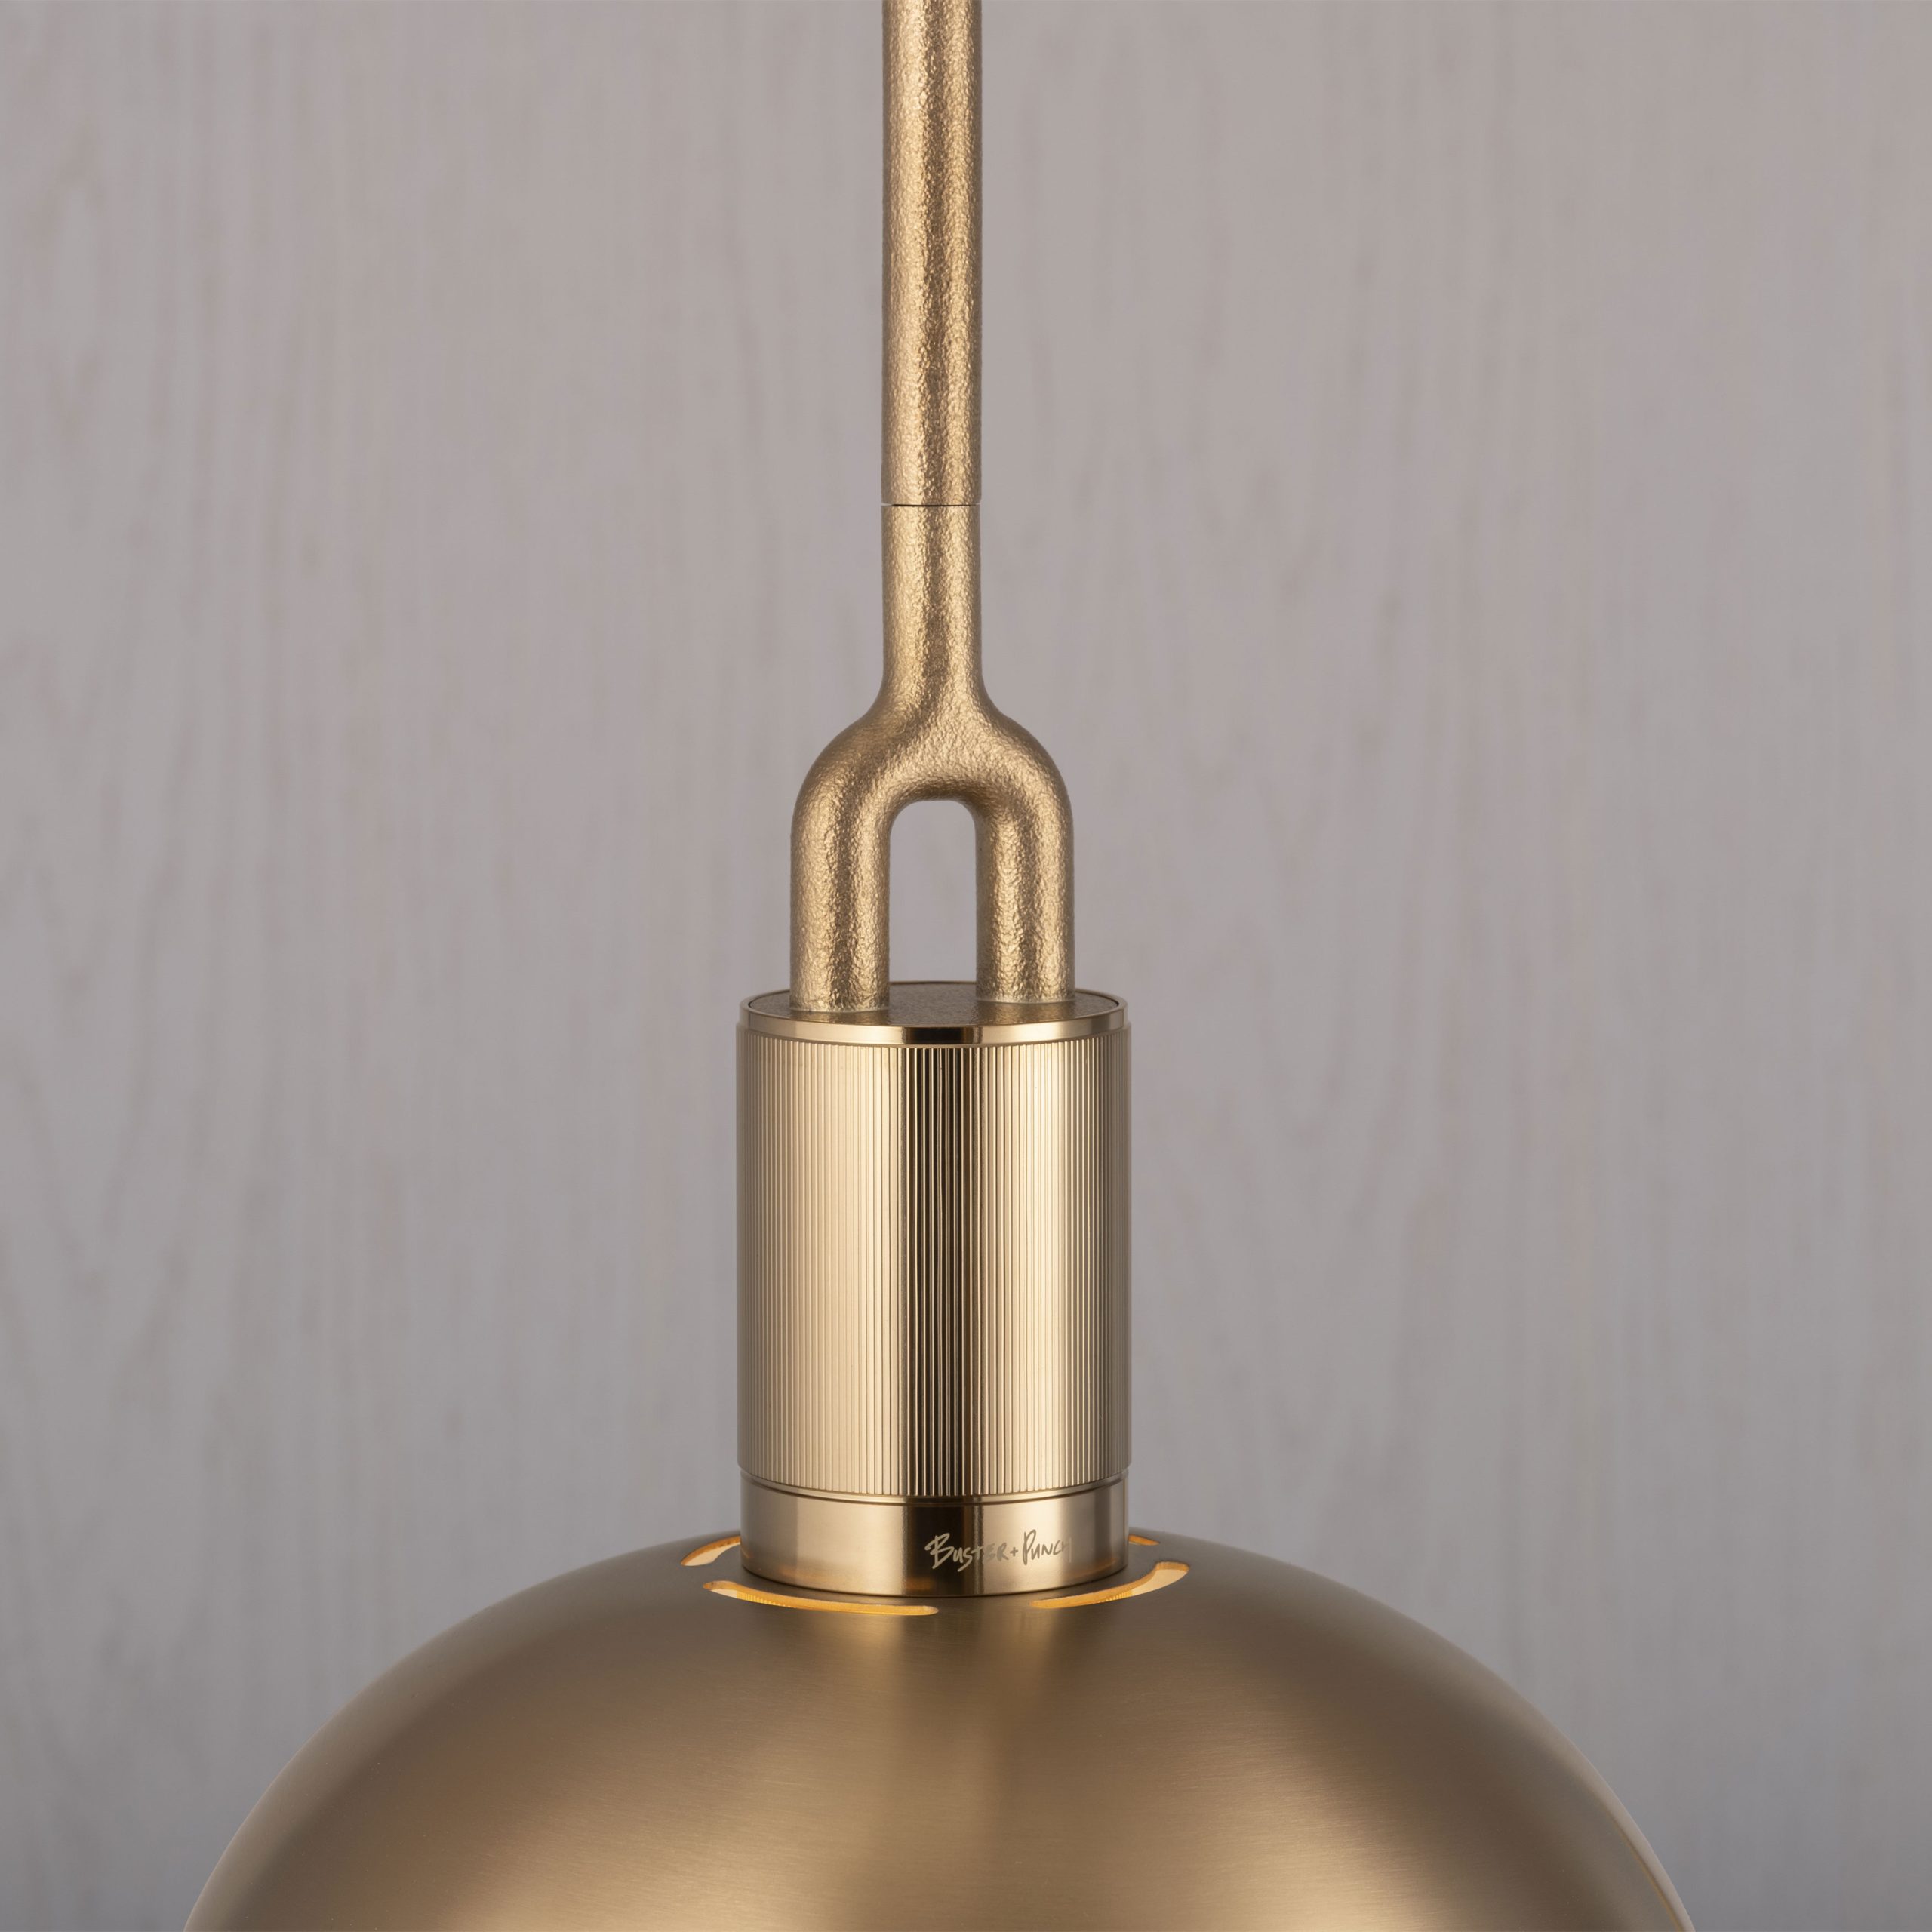 Forked_Lighting_Pendant_Detail_Brass_Shade-copy_Web